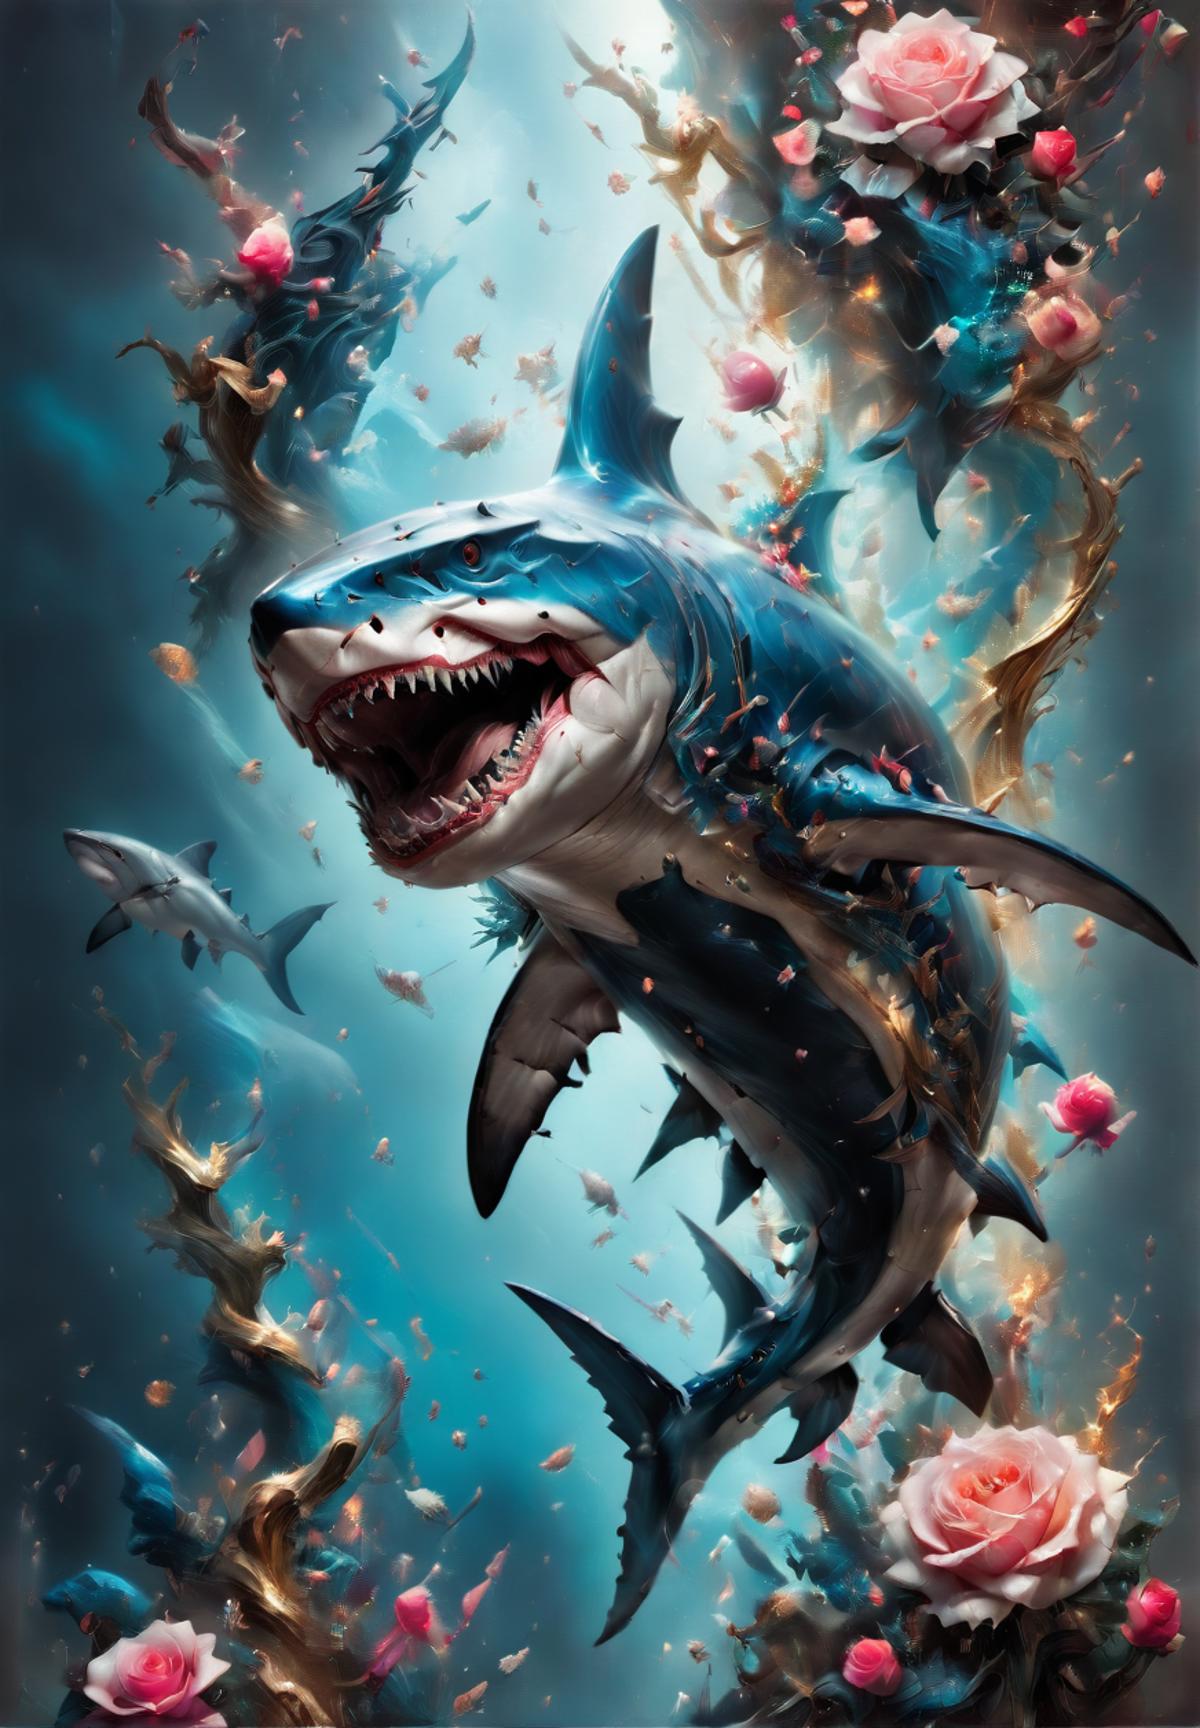 A colorful, digital painting of a shark with open mouth and big teeth, surrounded by seaweed, pink flowers, and other marine creatures.